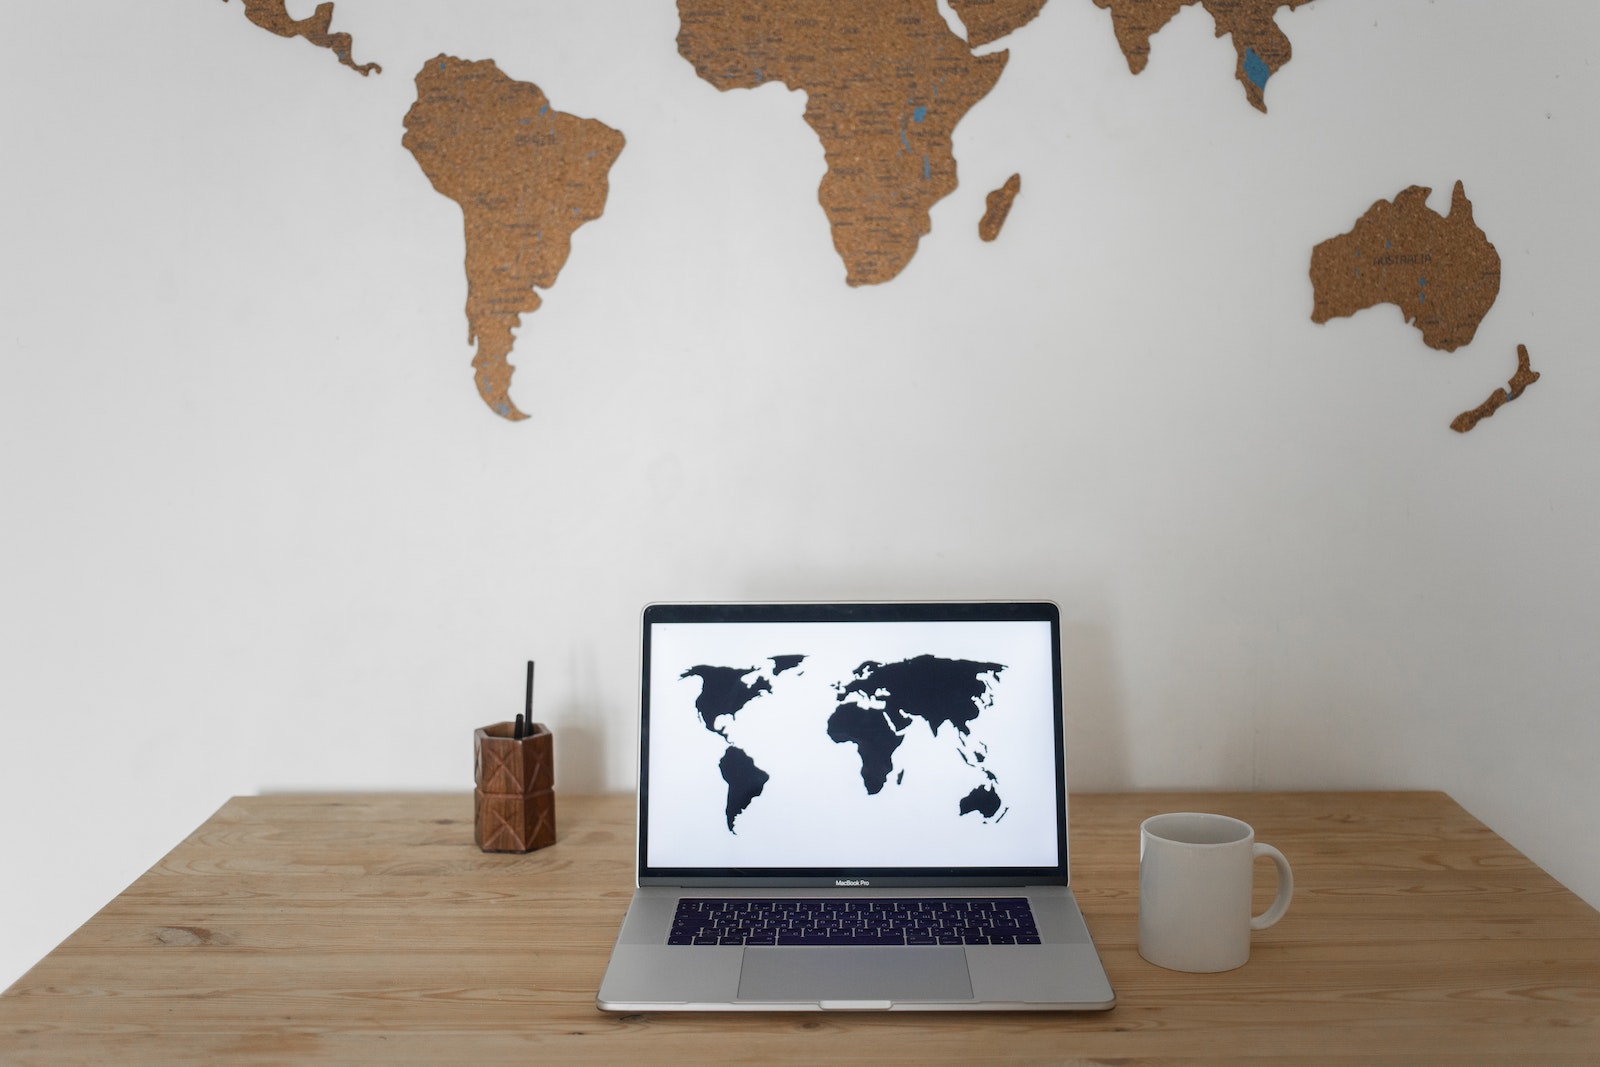 Black world map on laptop screen and ceramic cup with pen container placed on table against silhouettes of continents